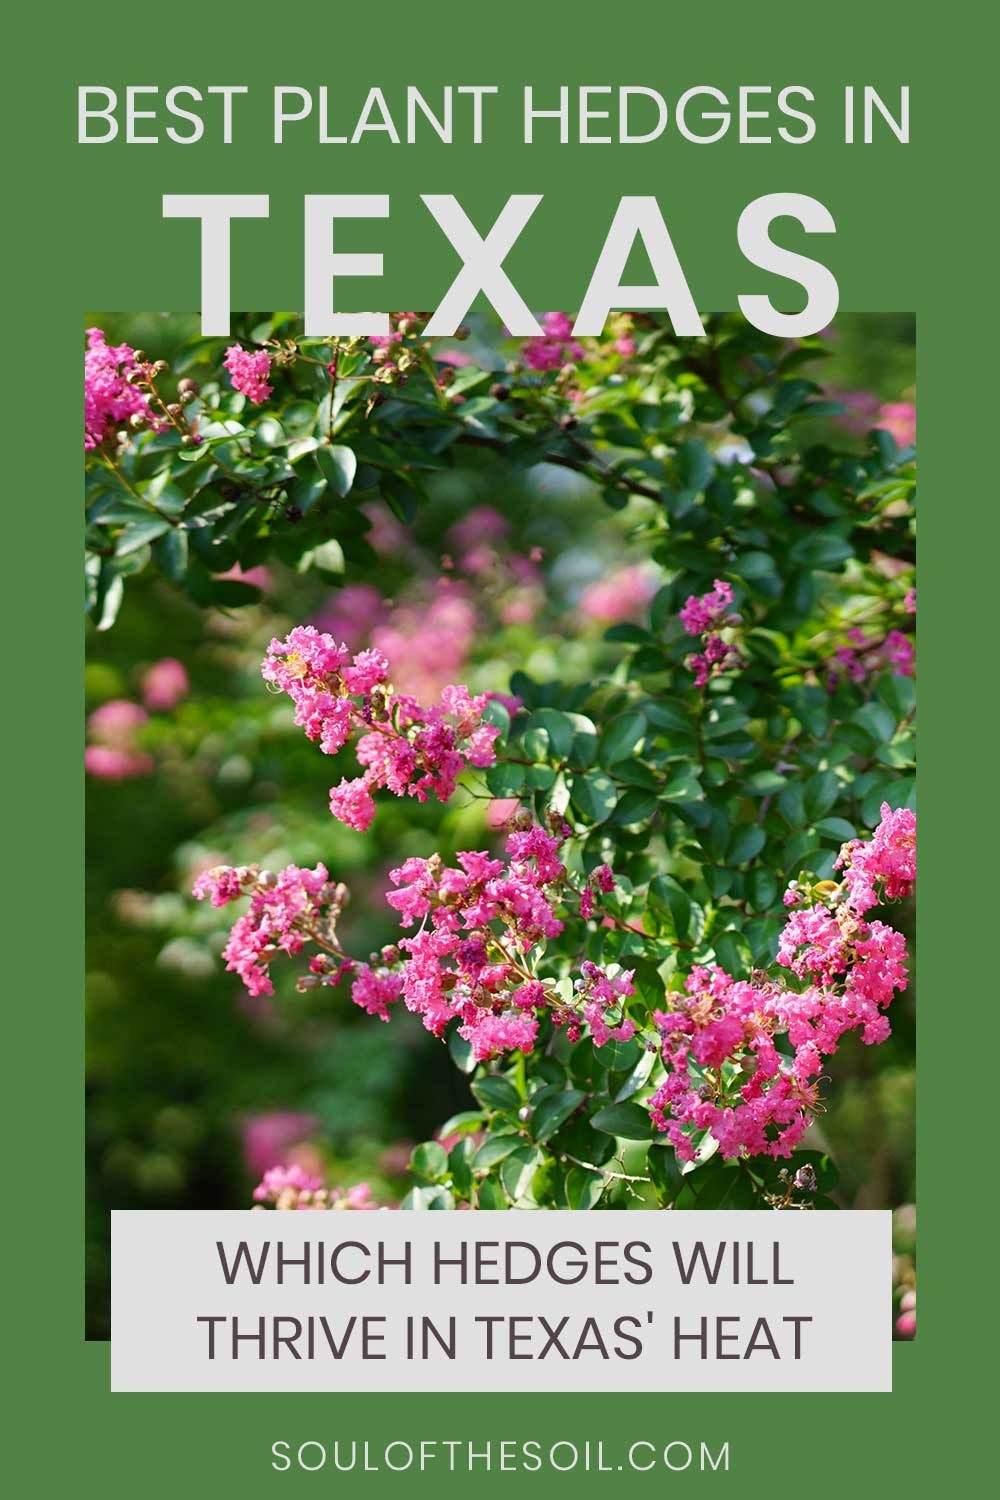 Crape Myrtle tree brand with flower - Best Plant Hedges In Texas - Which Hedges Will Thrive in Texas' Heat